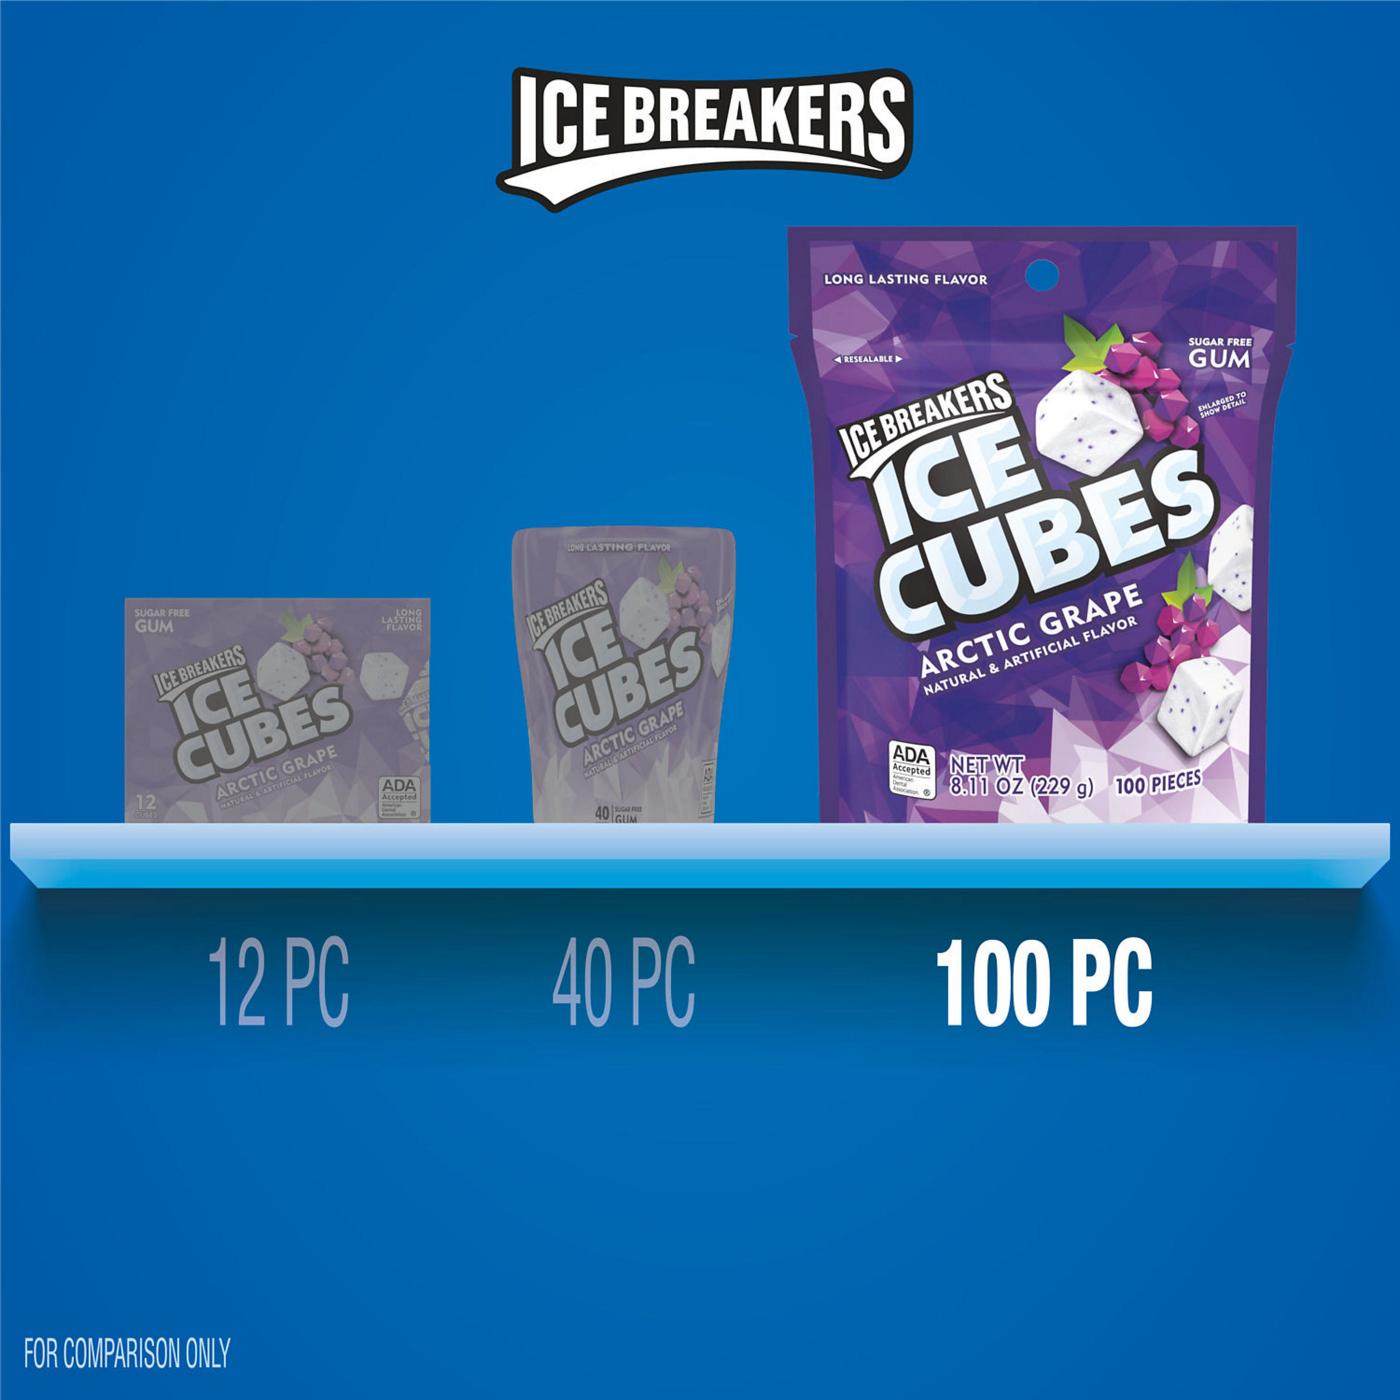 Ice Breakers Ice Cubes Arctic Grape Sugar Free Chewing Gum Pouch; image 7 of 7